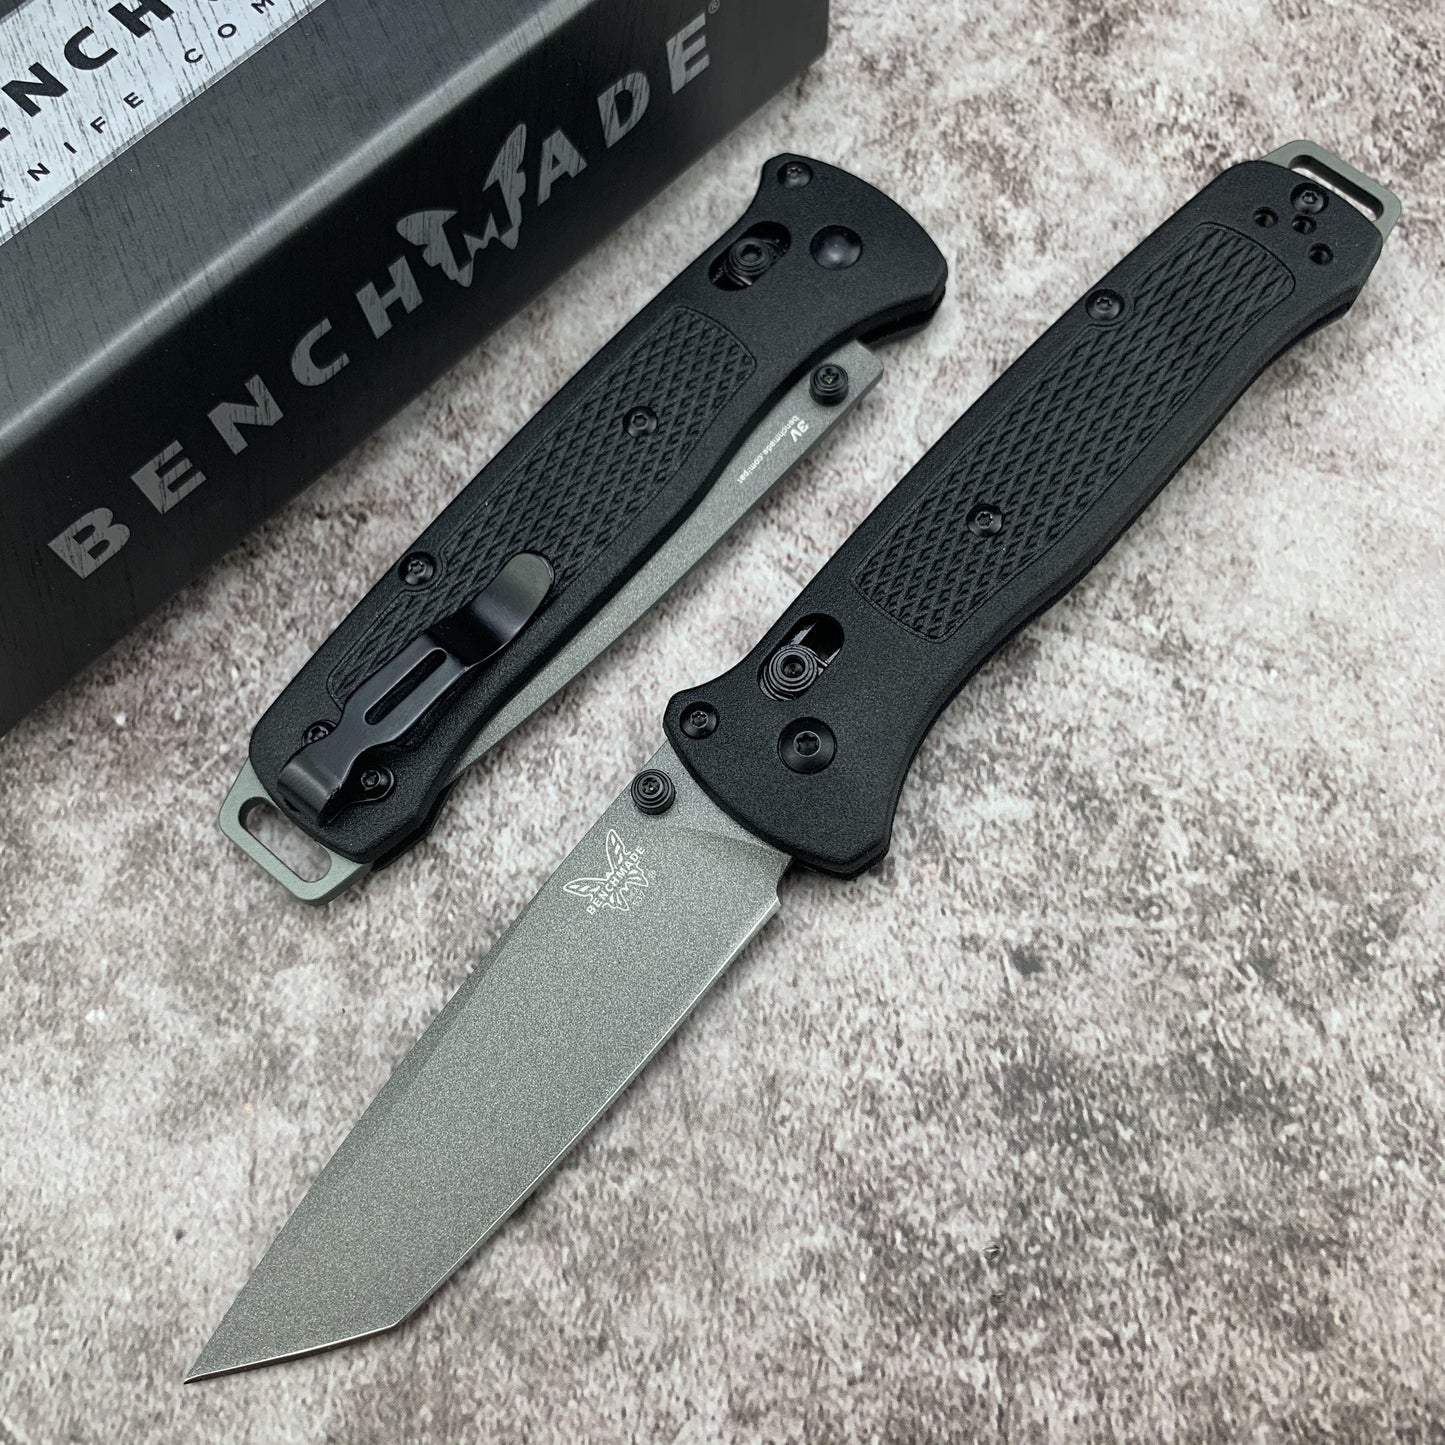 Benchmade - Bailout 537, EDC Tactical Folding Knife, Tanto Blade, Manual Open, Axis Locking Mechanism